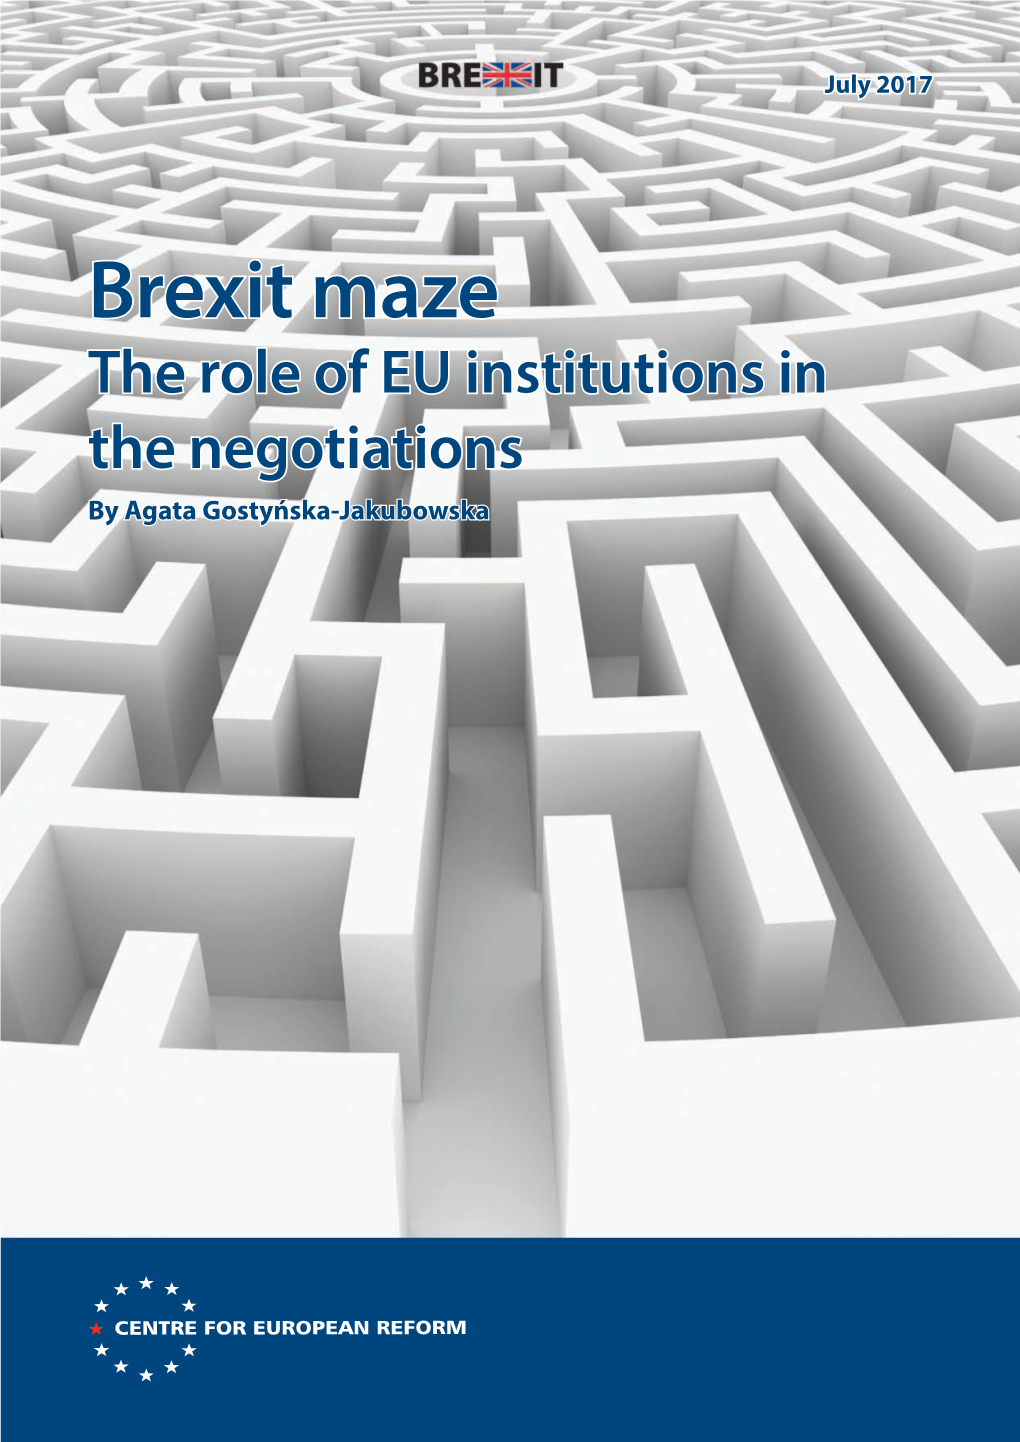 Brexit Maze: the Role of EU Institutions in the Negotiations by Agata Gostyńska-Jakubowska